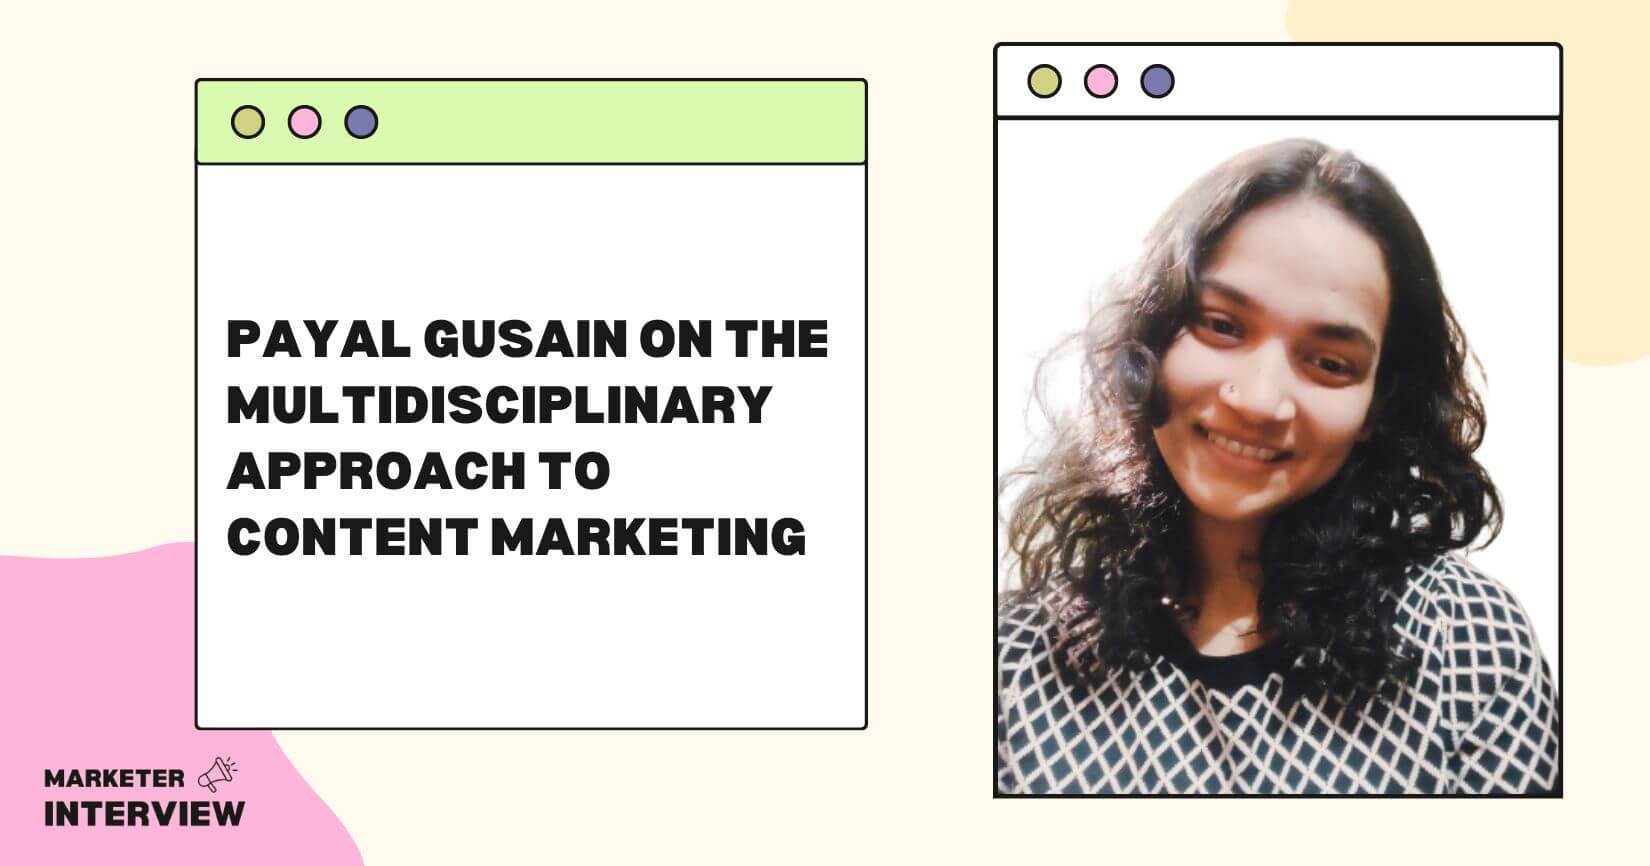 Payal Gusain on the Multidisciplinary Approach to Content Marketing